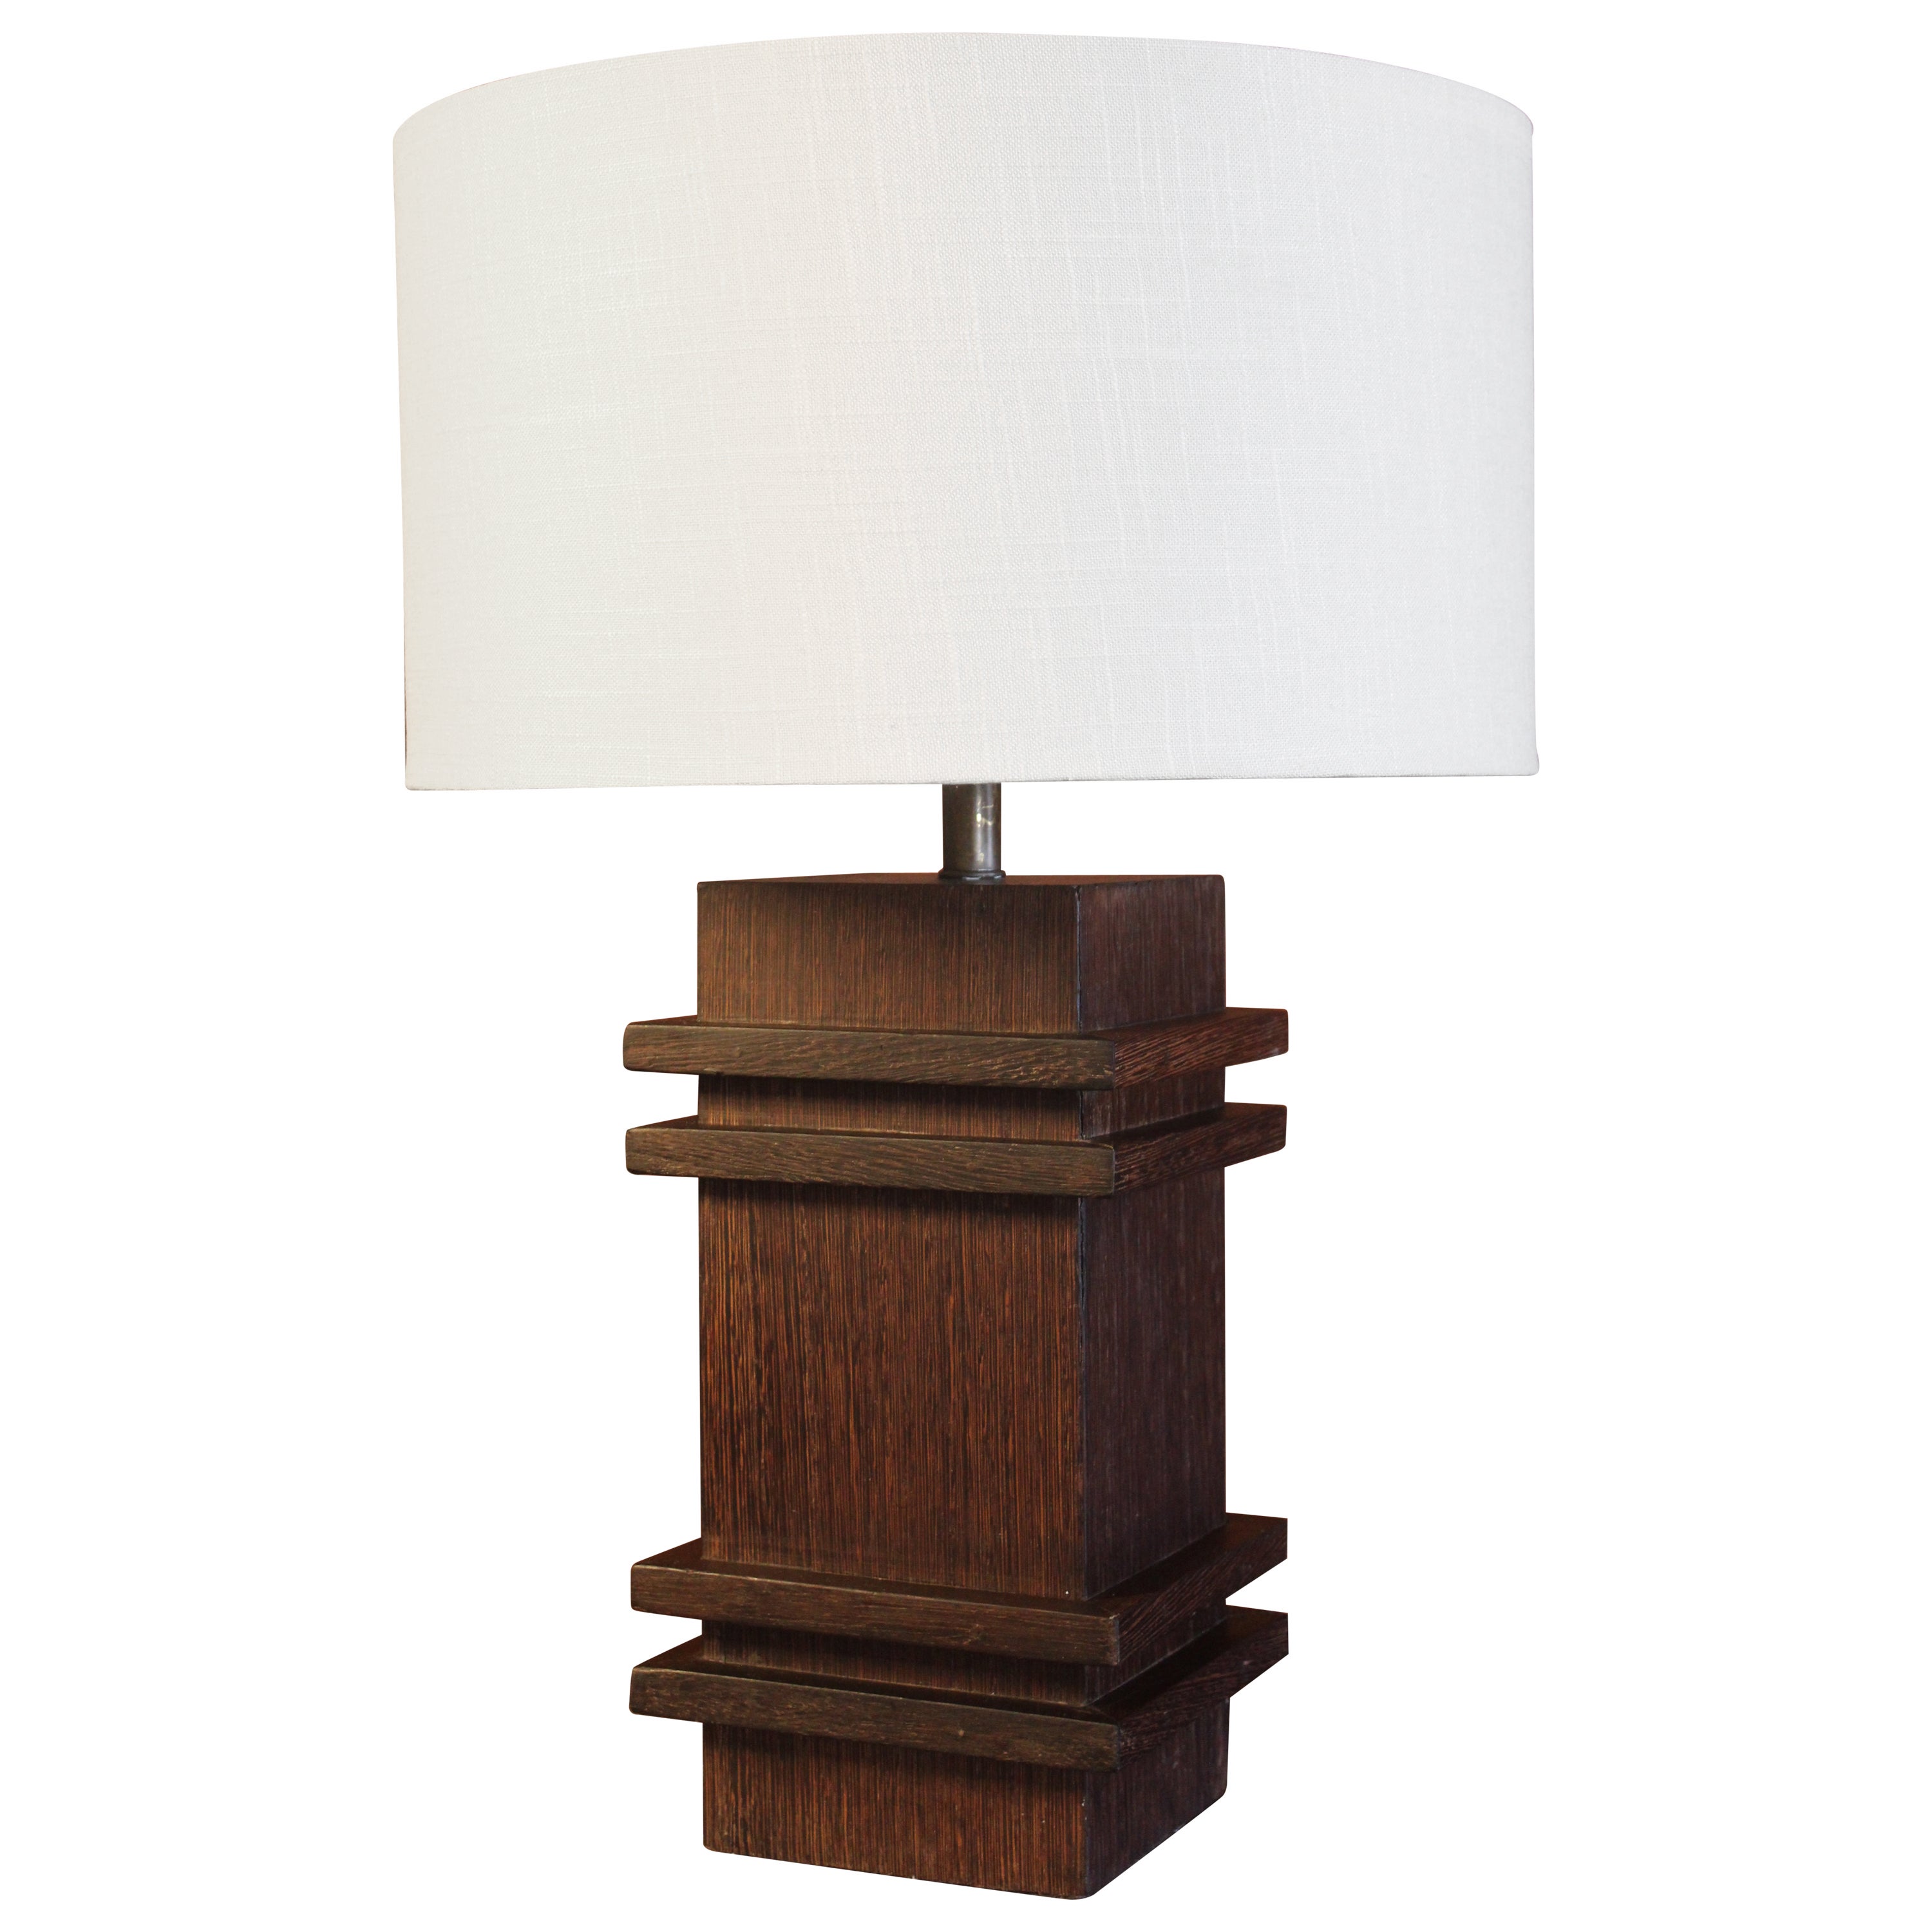 Palmwood Table Lamp by Jacques Adnet, France, 1940s